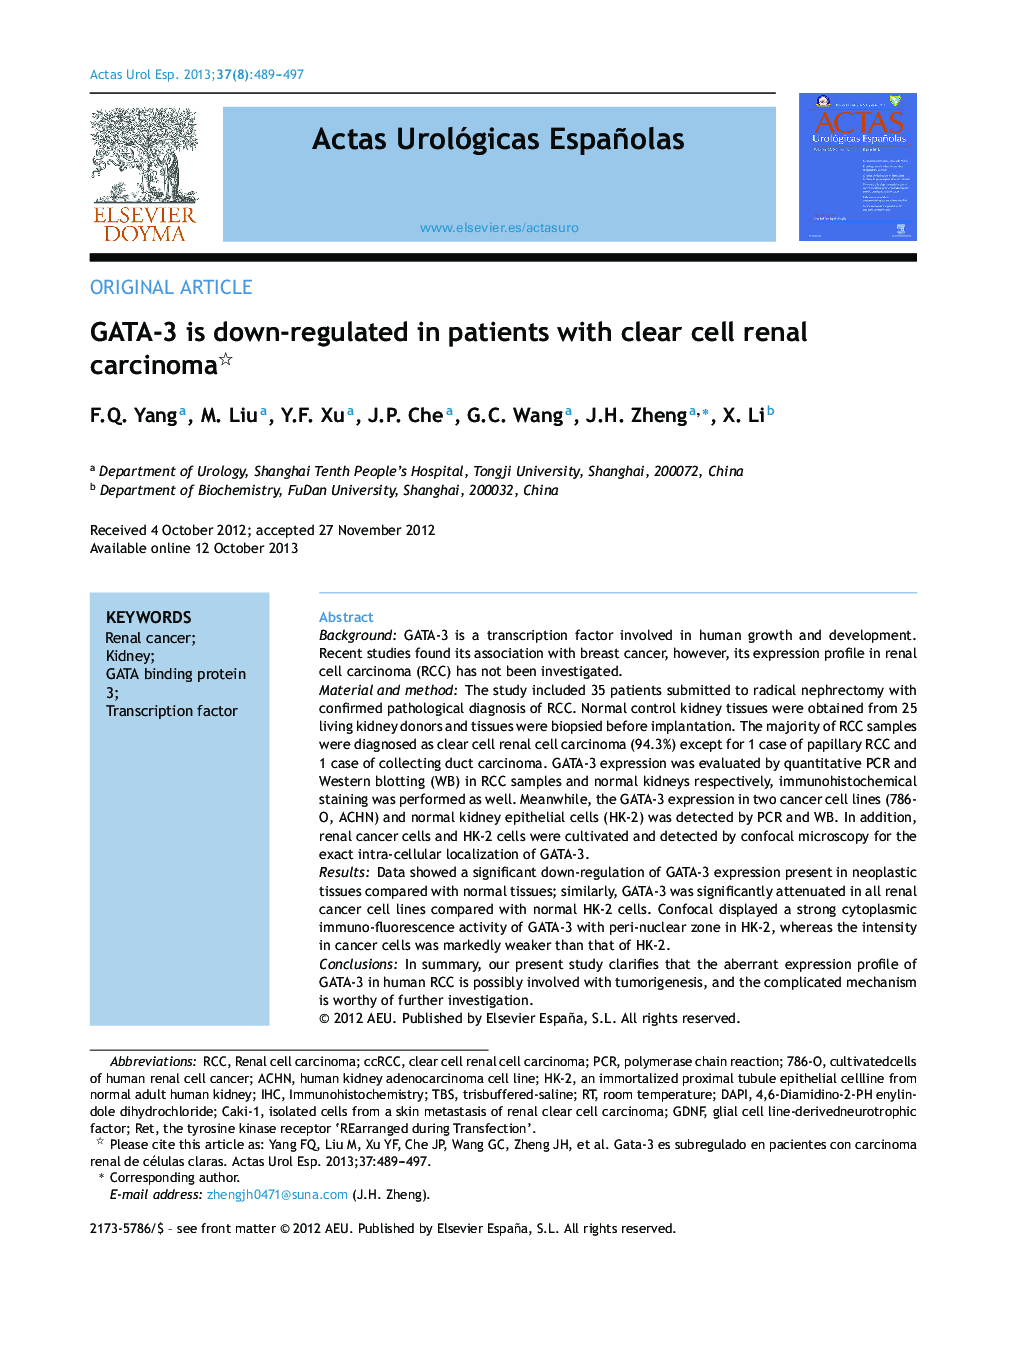 GATA-3 is down-regulated in patients with clear cell renal carcinoma 